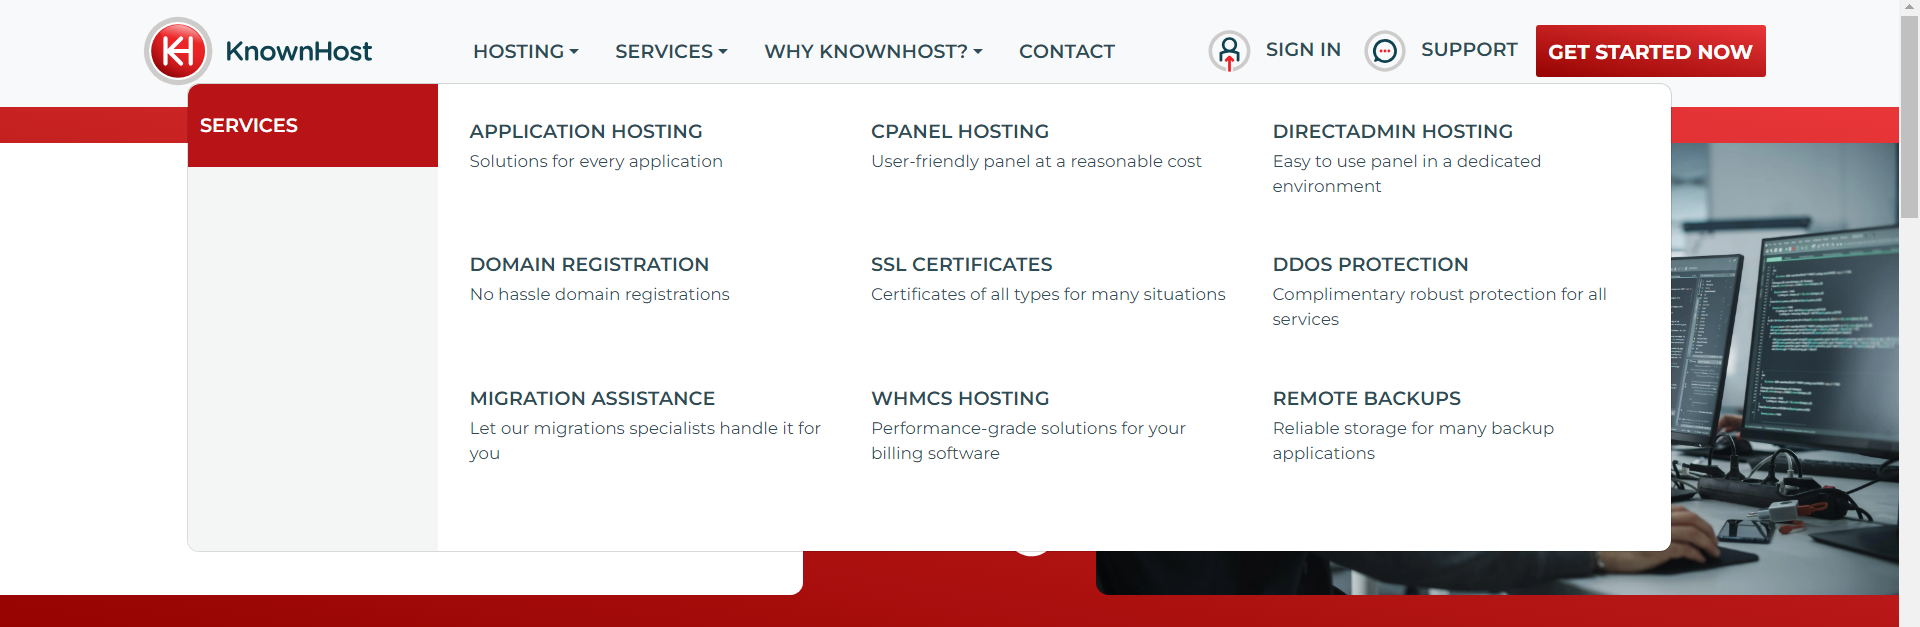 knownhost services